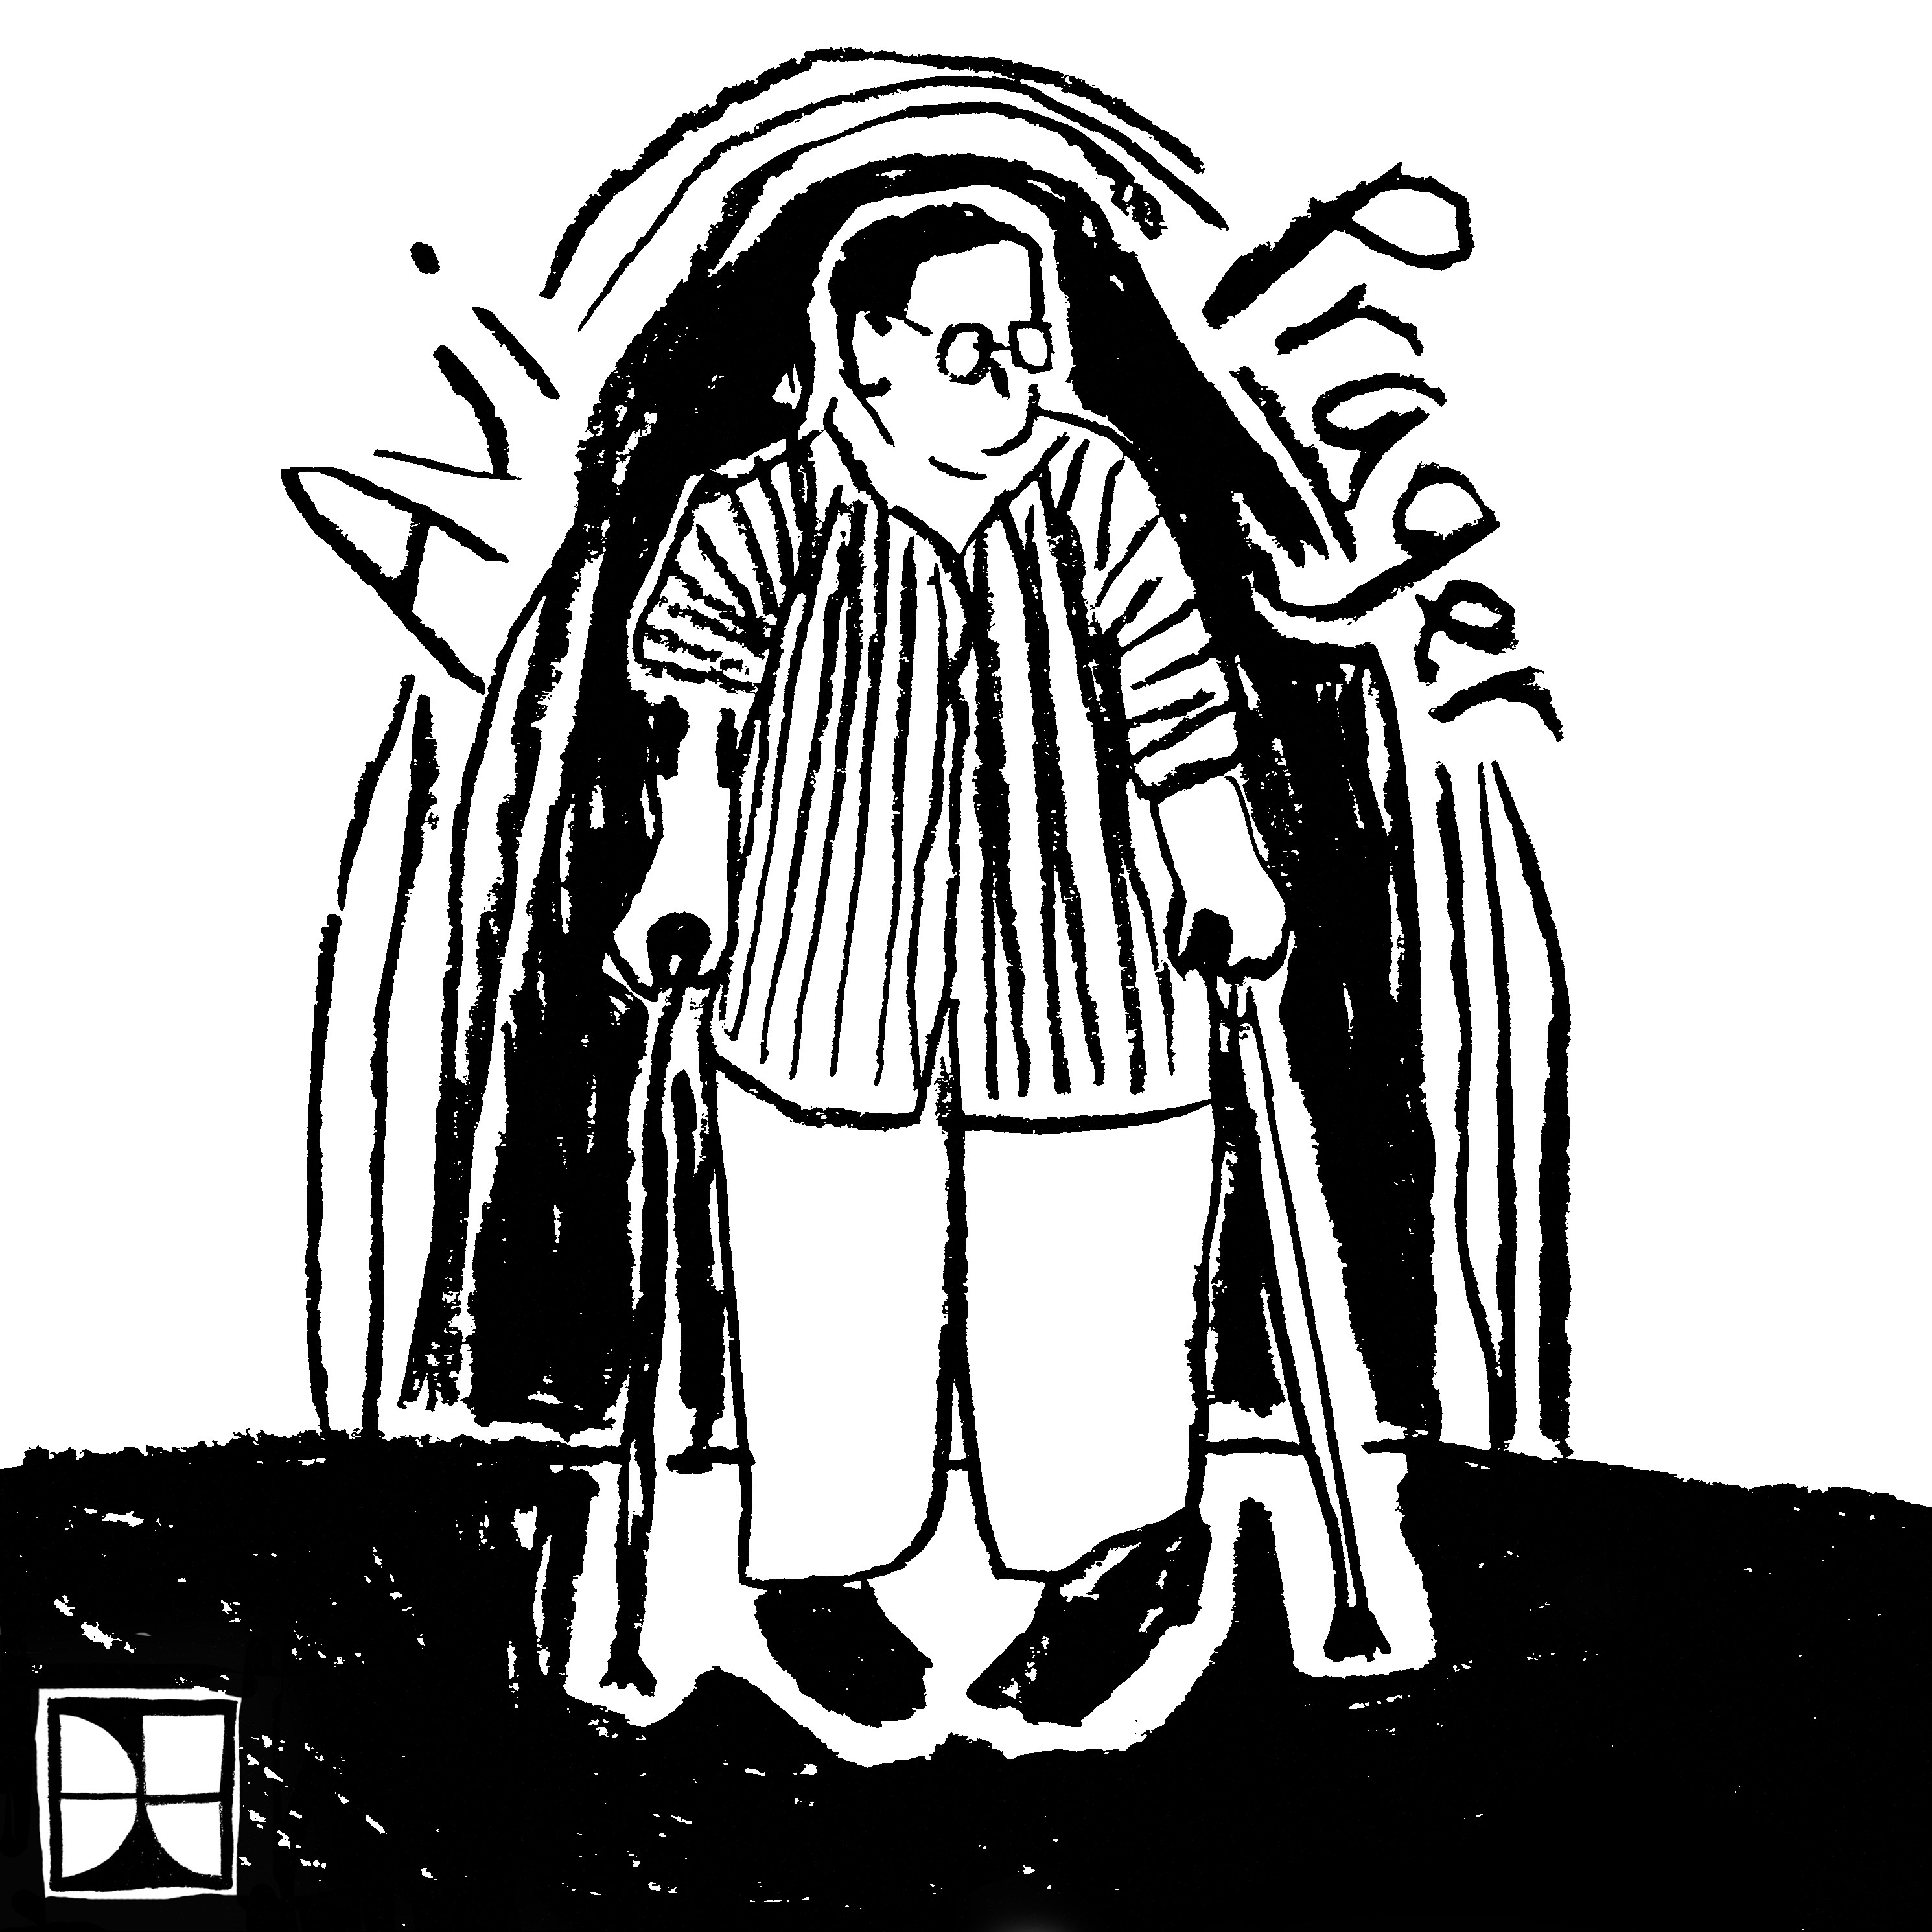 Avi Prager podcast cover. Black and white charcoal drawing of Avi supported by crutches in a standing position wearing a striped shirt and glasses.